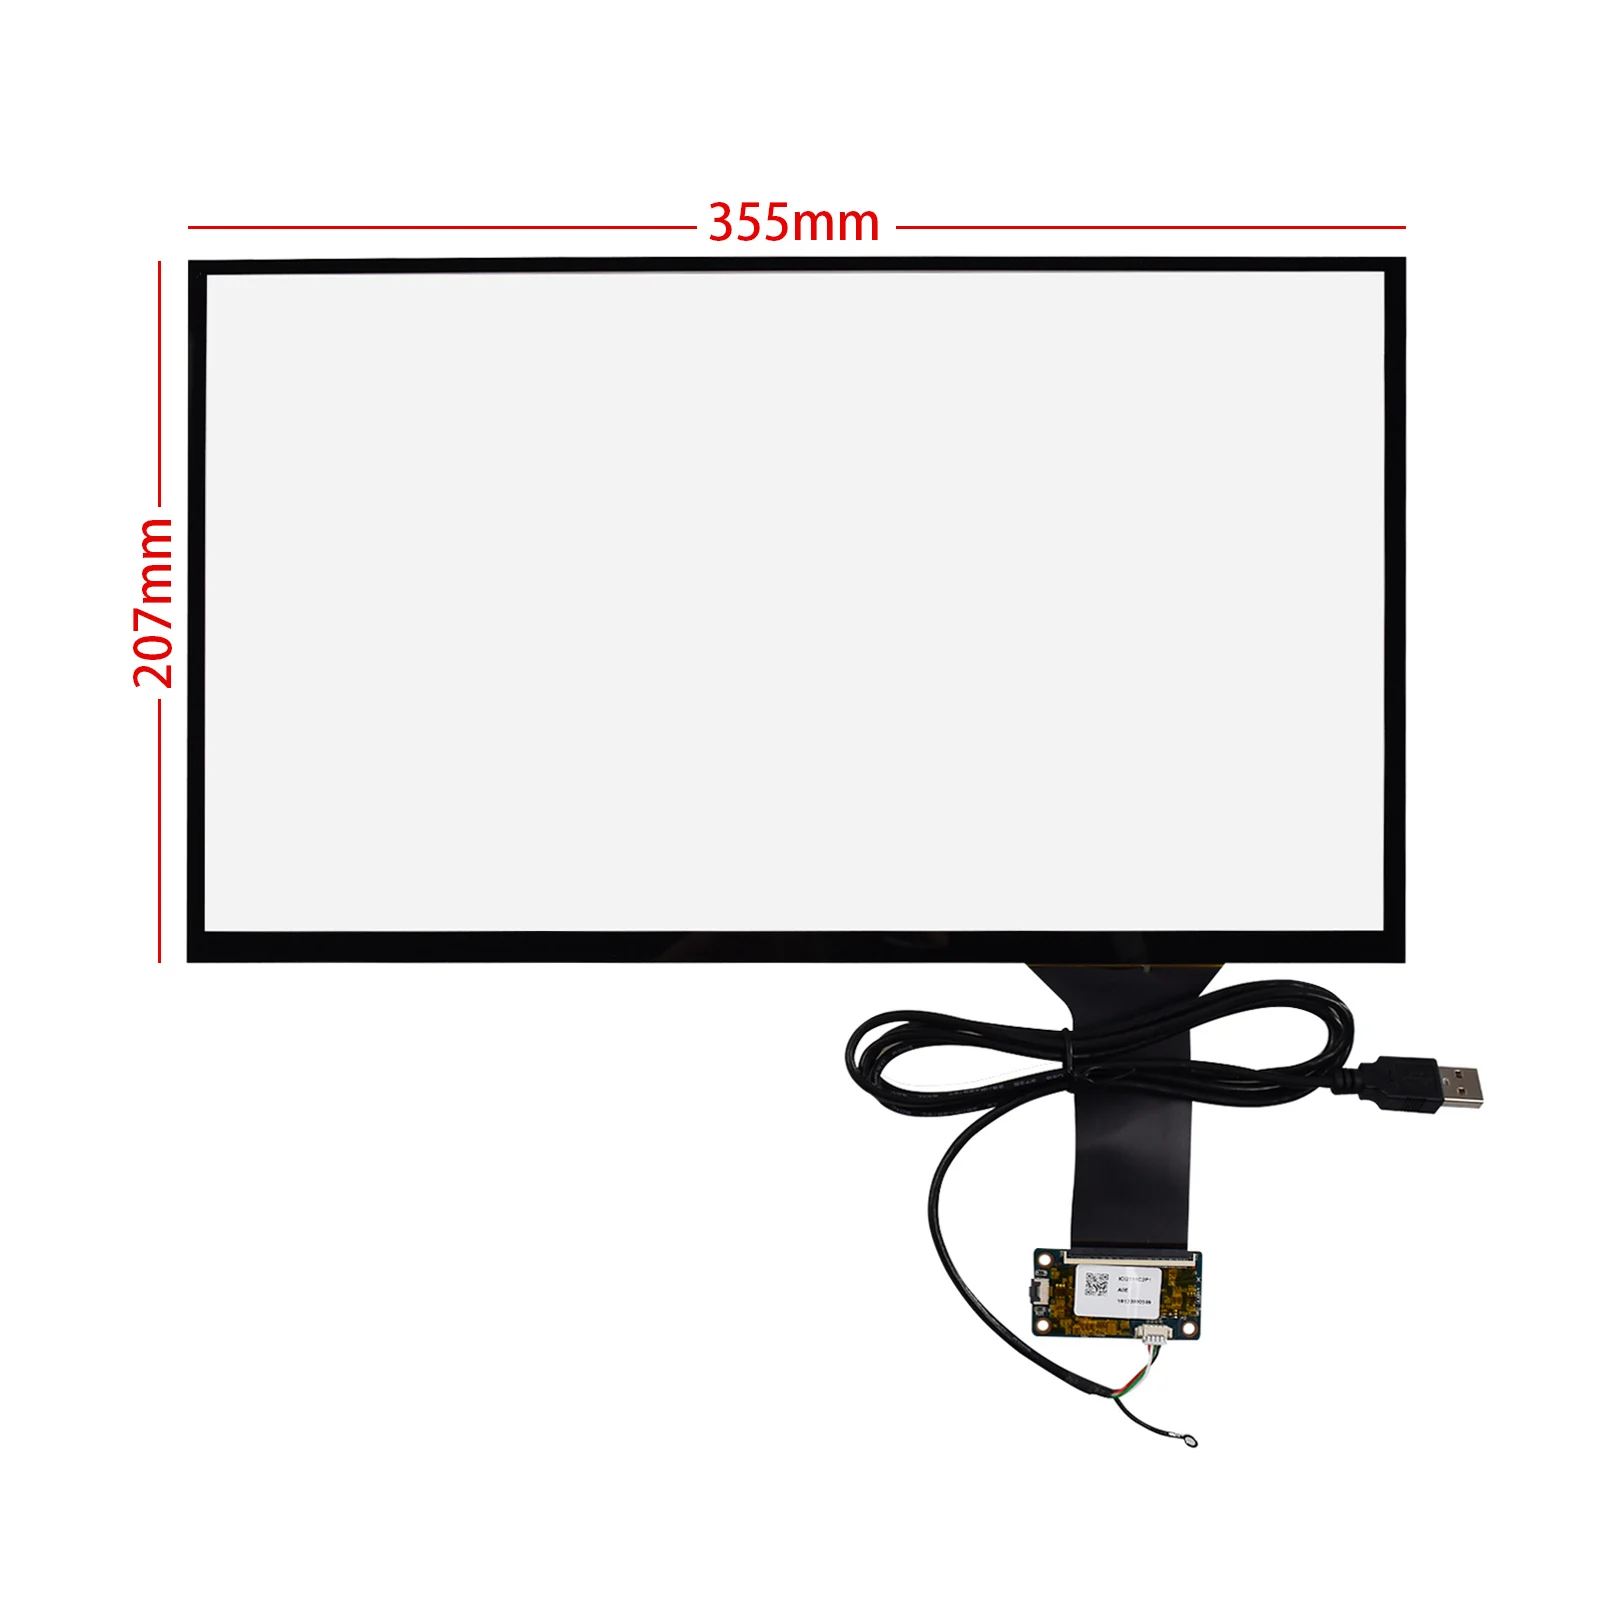 15.6 inch 16:9 Capacitive Multi Touch Screen 355*208mm + USB Controller for LCD